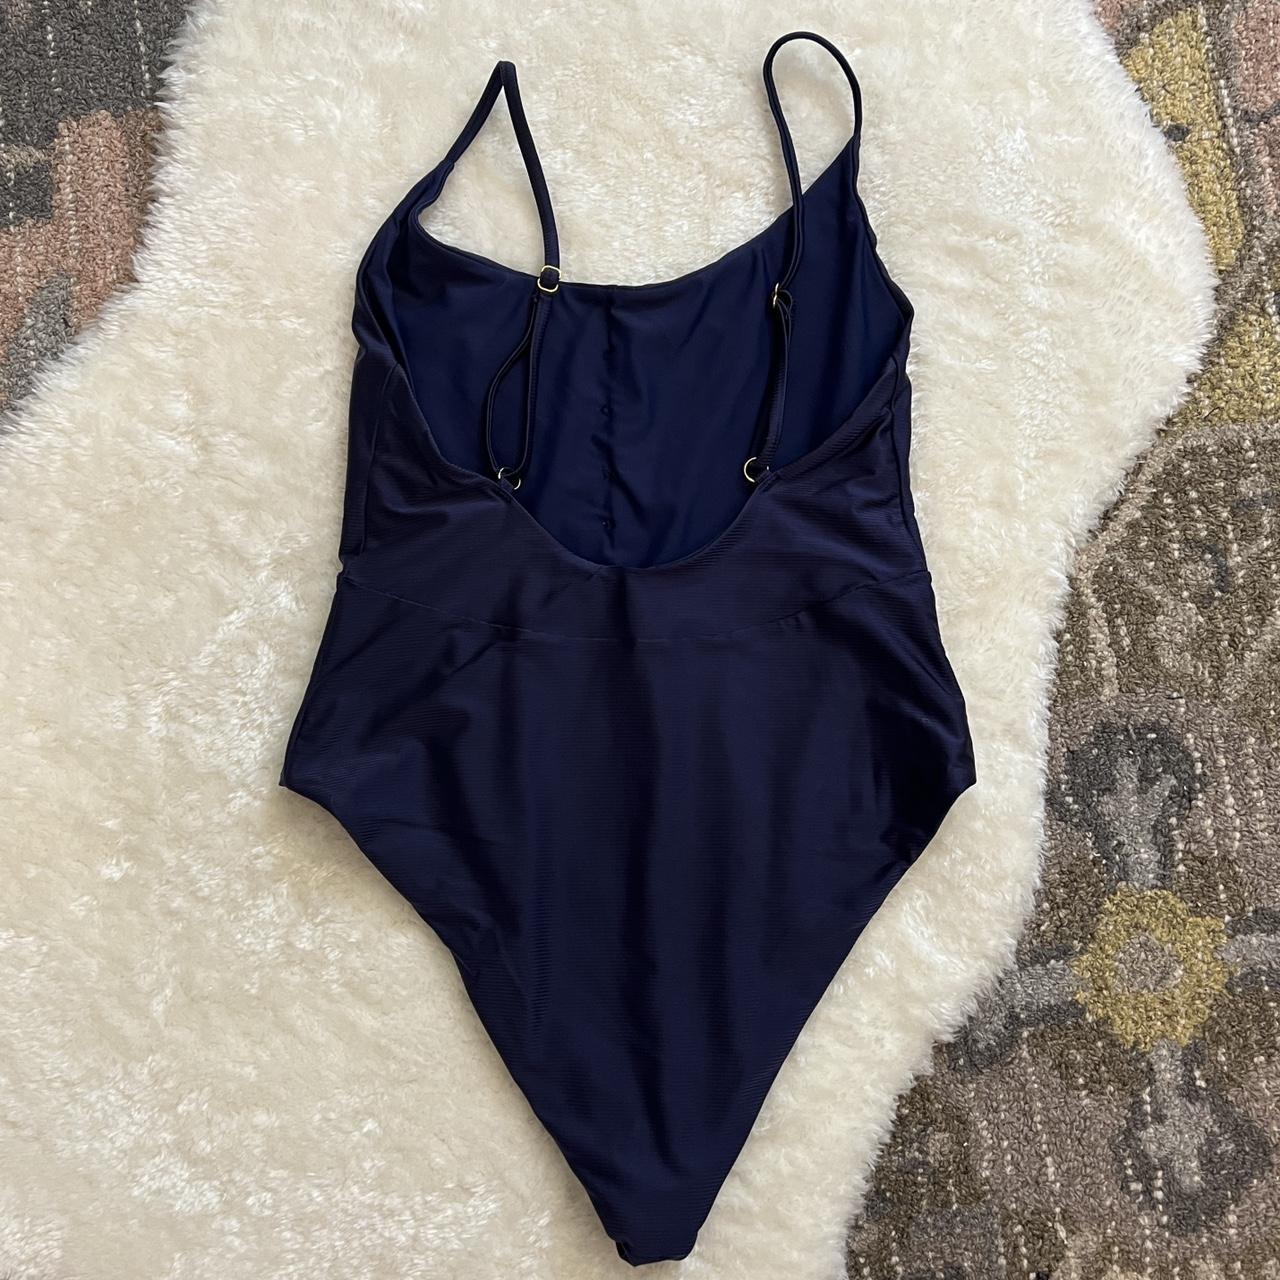 House of Harlow 1960 Swimsuit Size XS Adjustable... - Depop